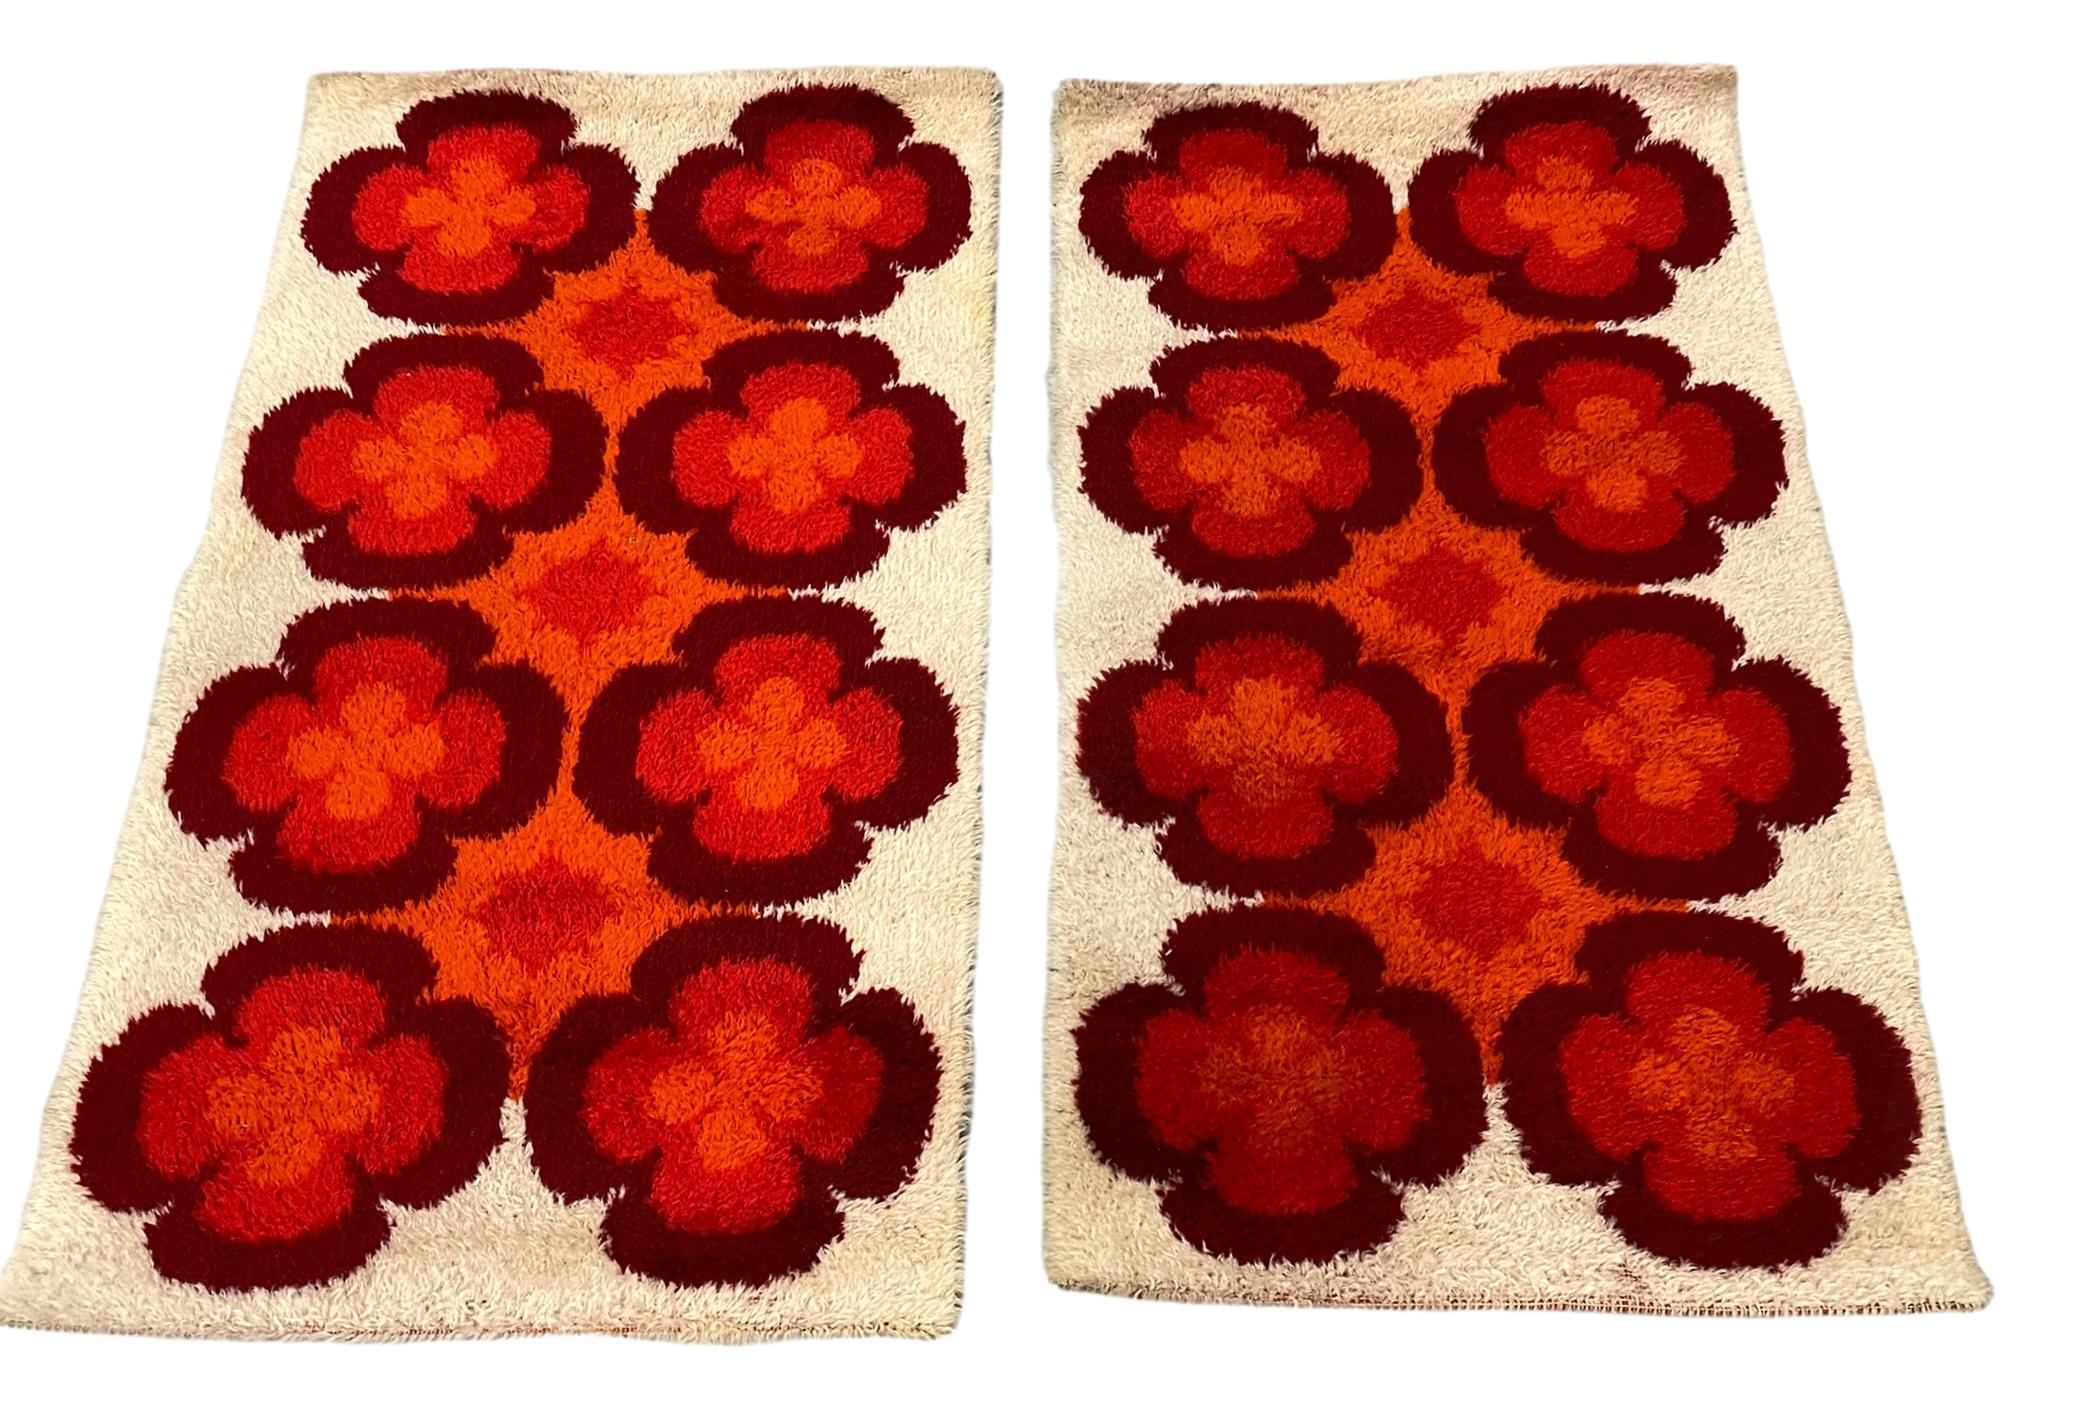 These two rugs are a great example of 1970s pop art interior. Made in high quality weaving technique. These two high quality high pile rugs were designed in the 1970s and manufactured in Germany. Each is made from wool and is still in a good vintage